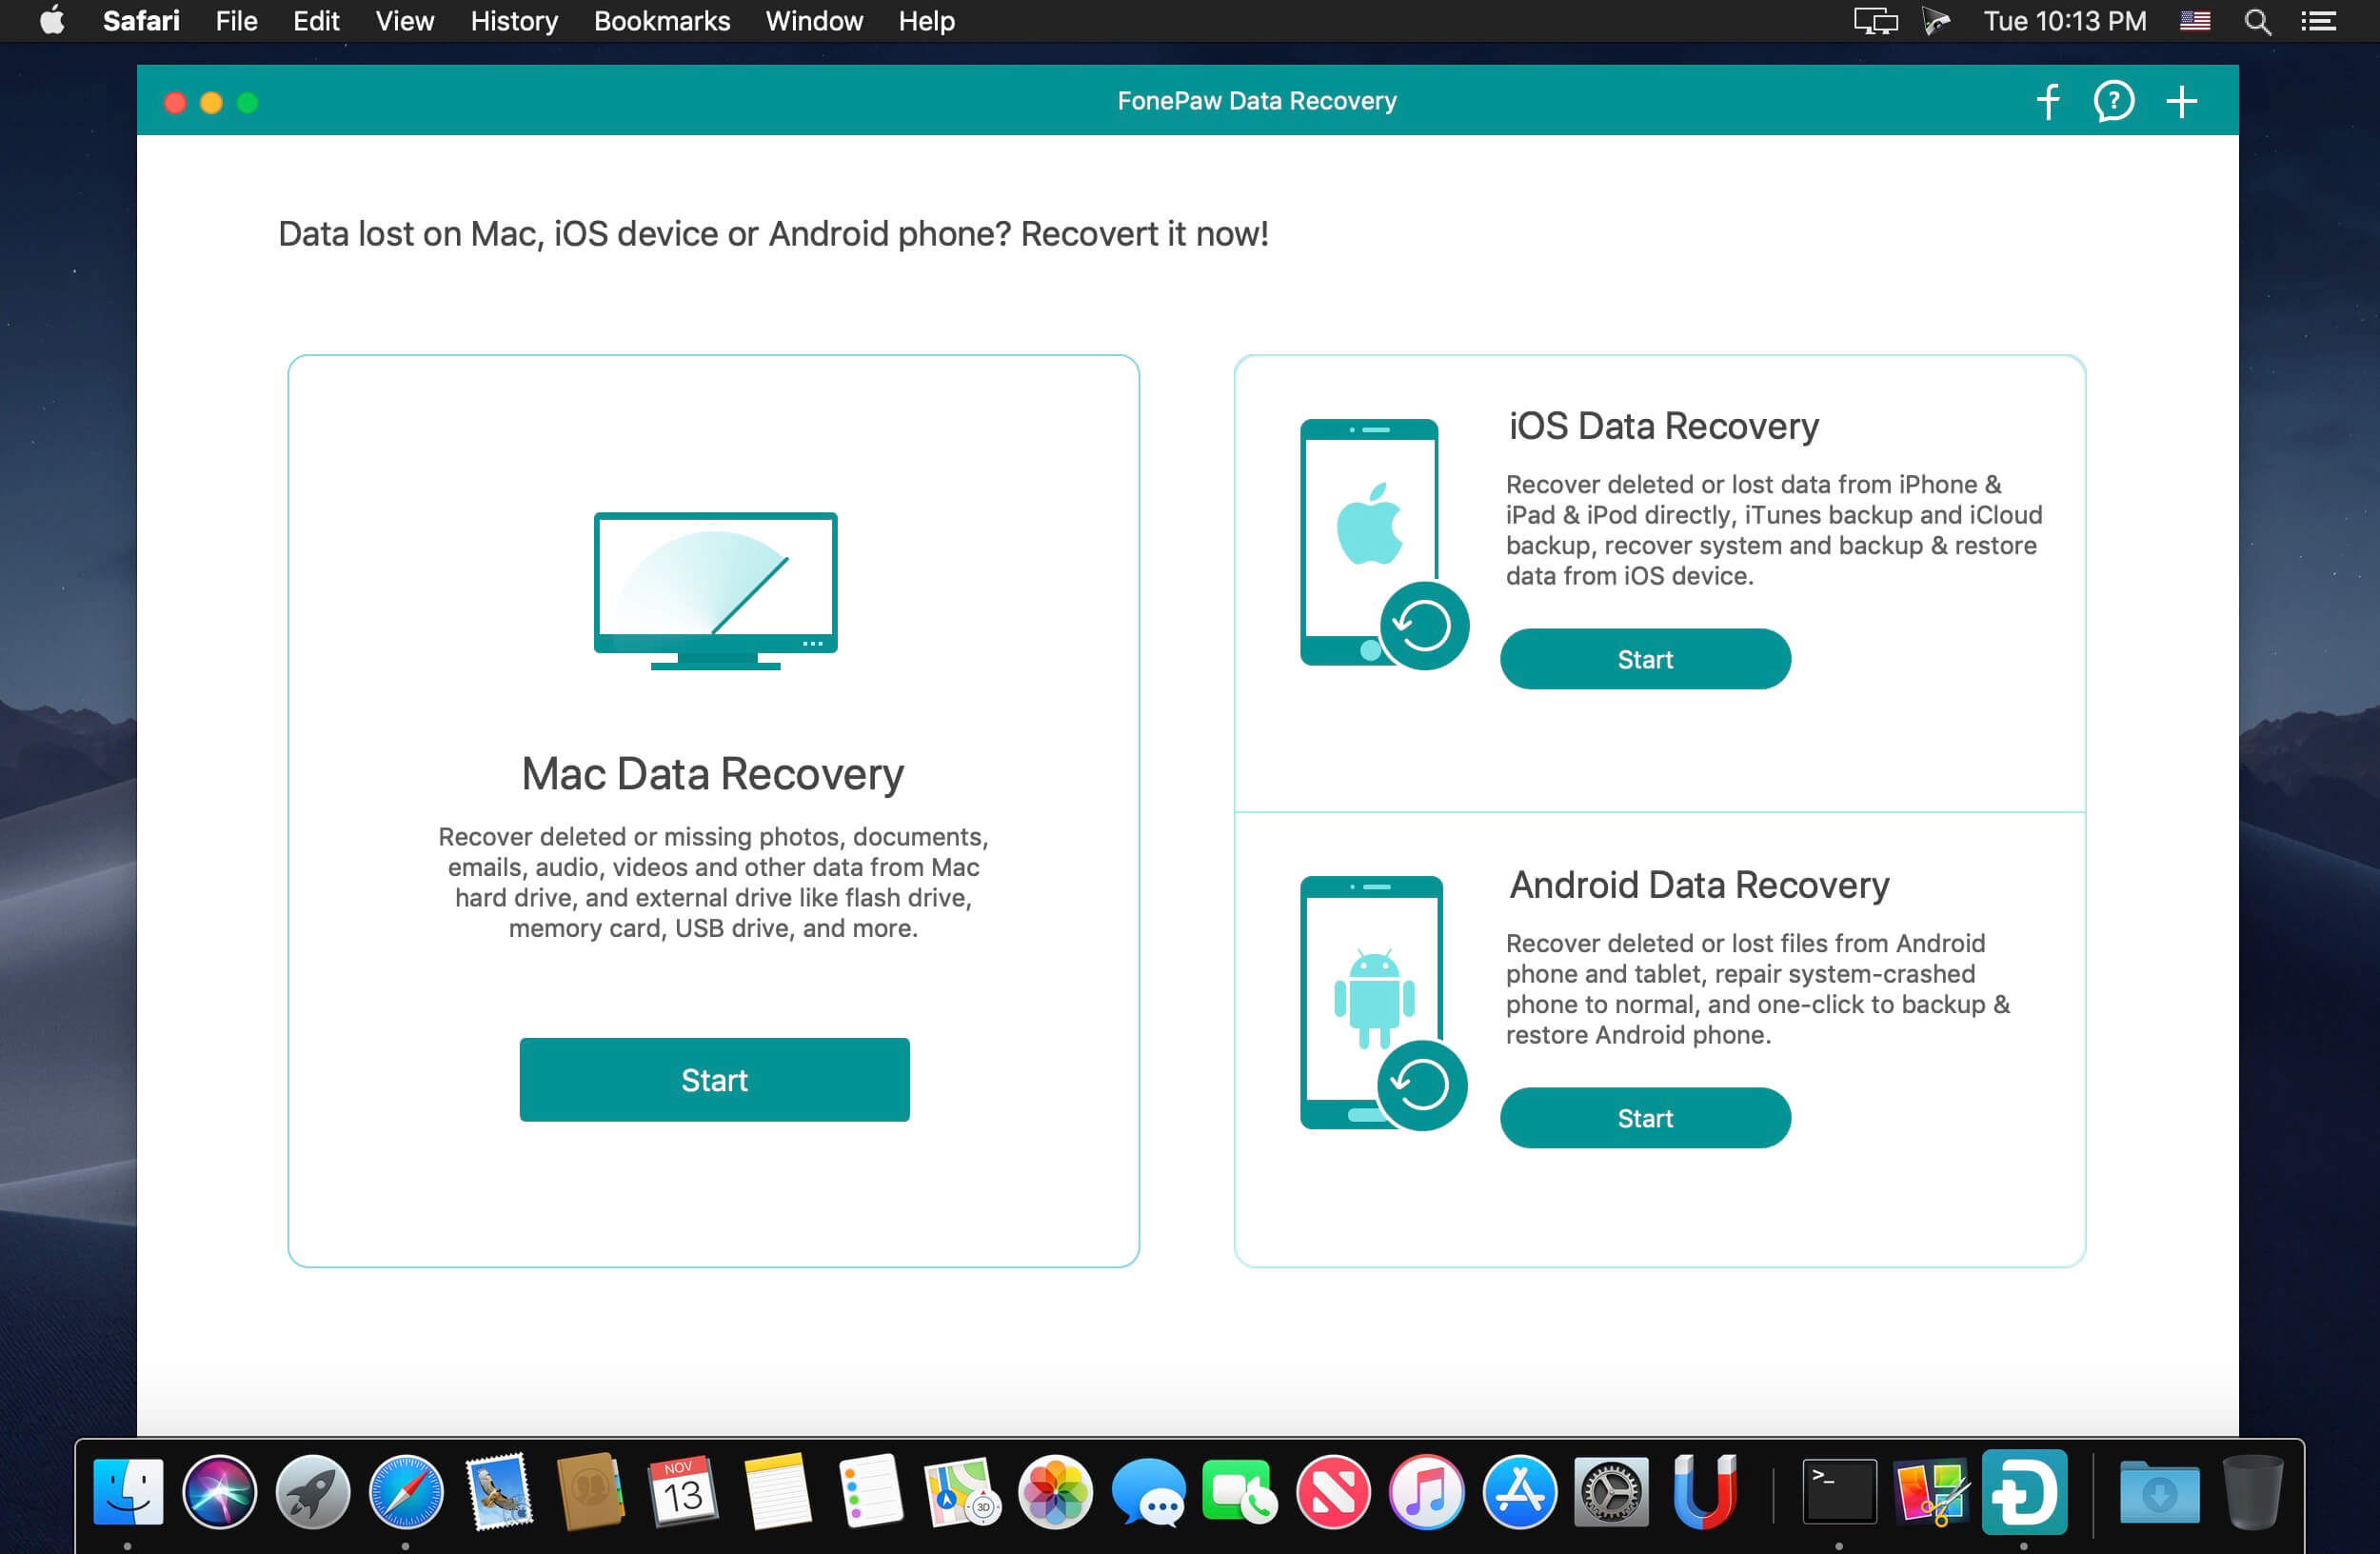 fonepaw android data recovery 2.0.0